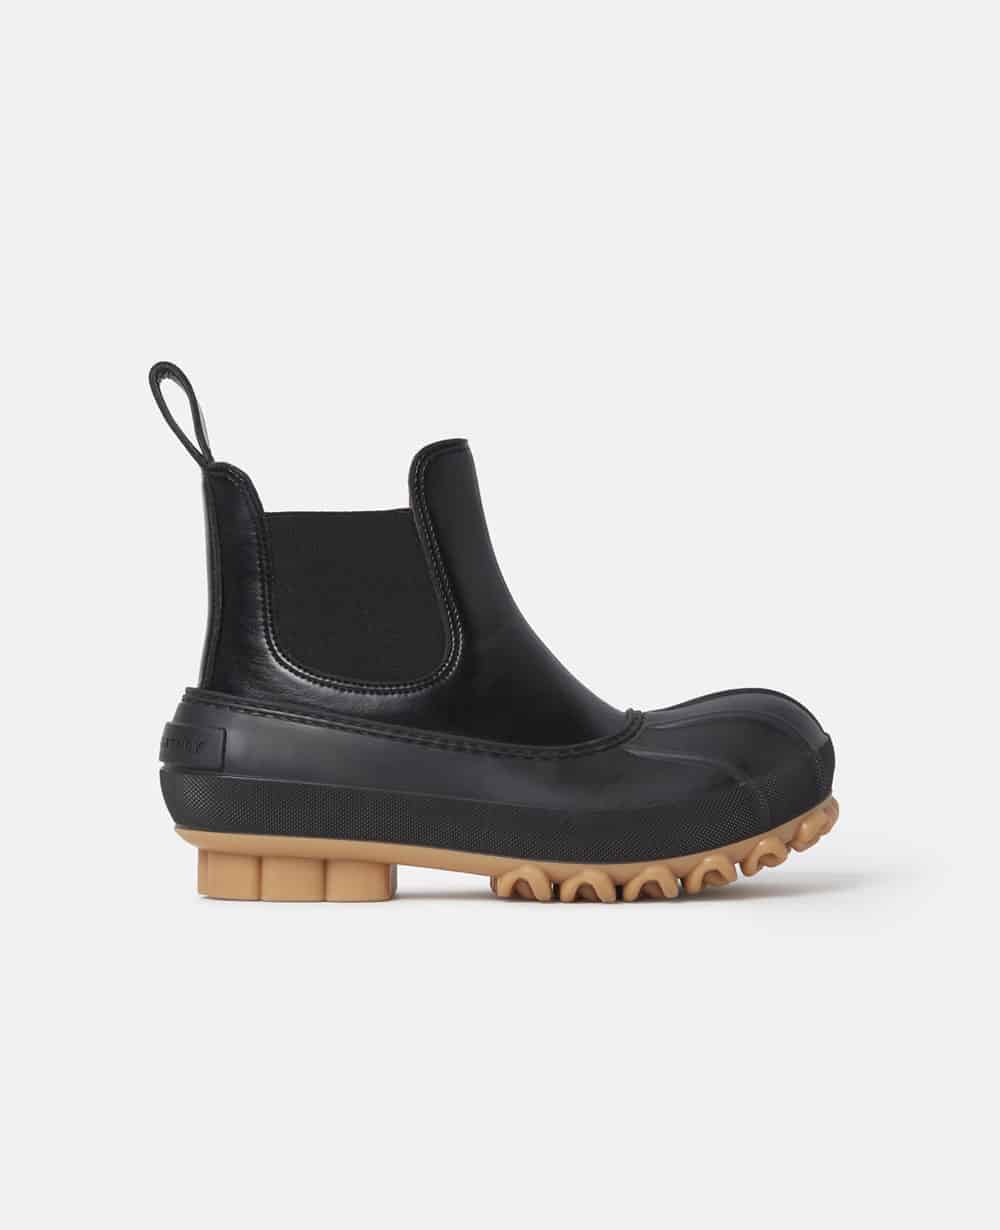 Duck City boots from Stella McCartney